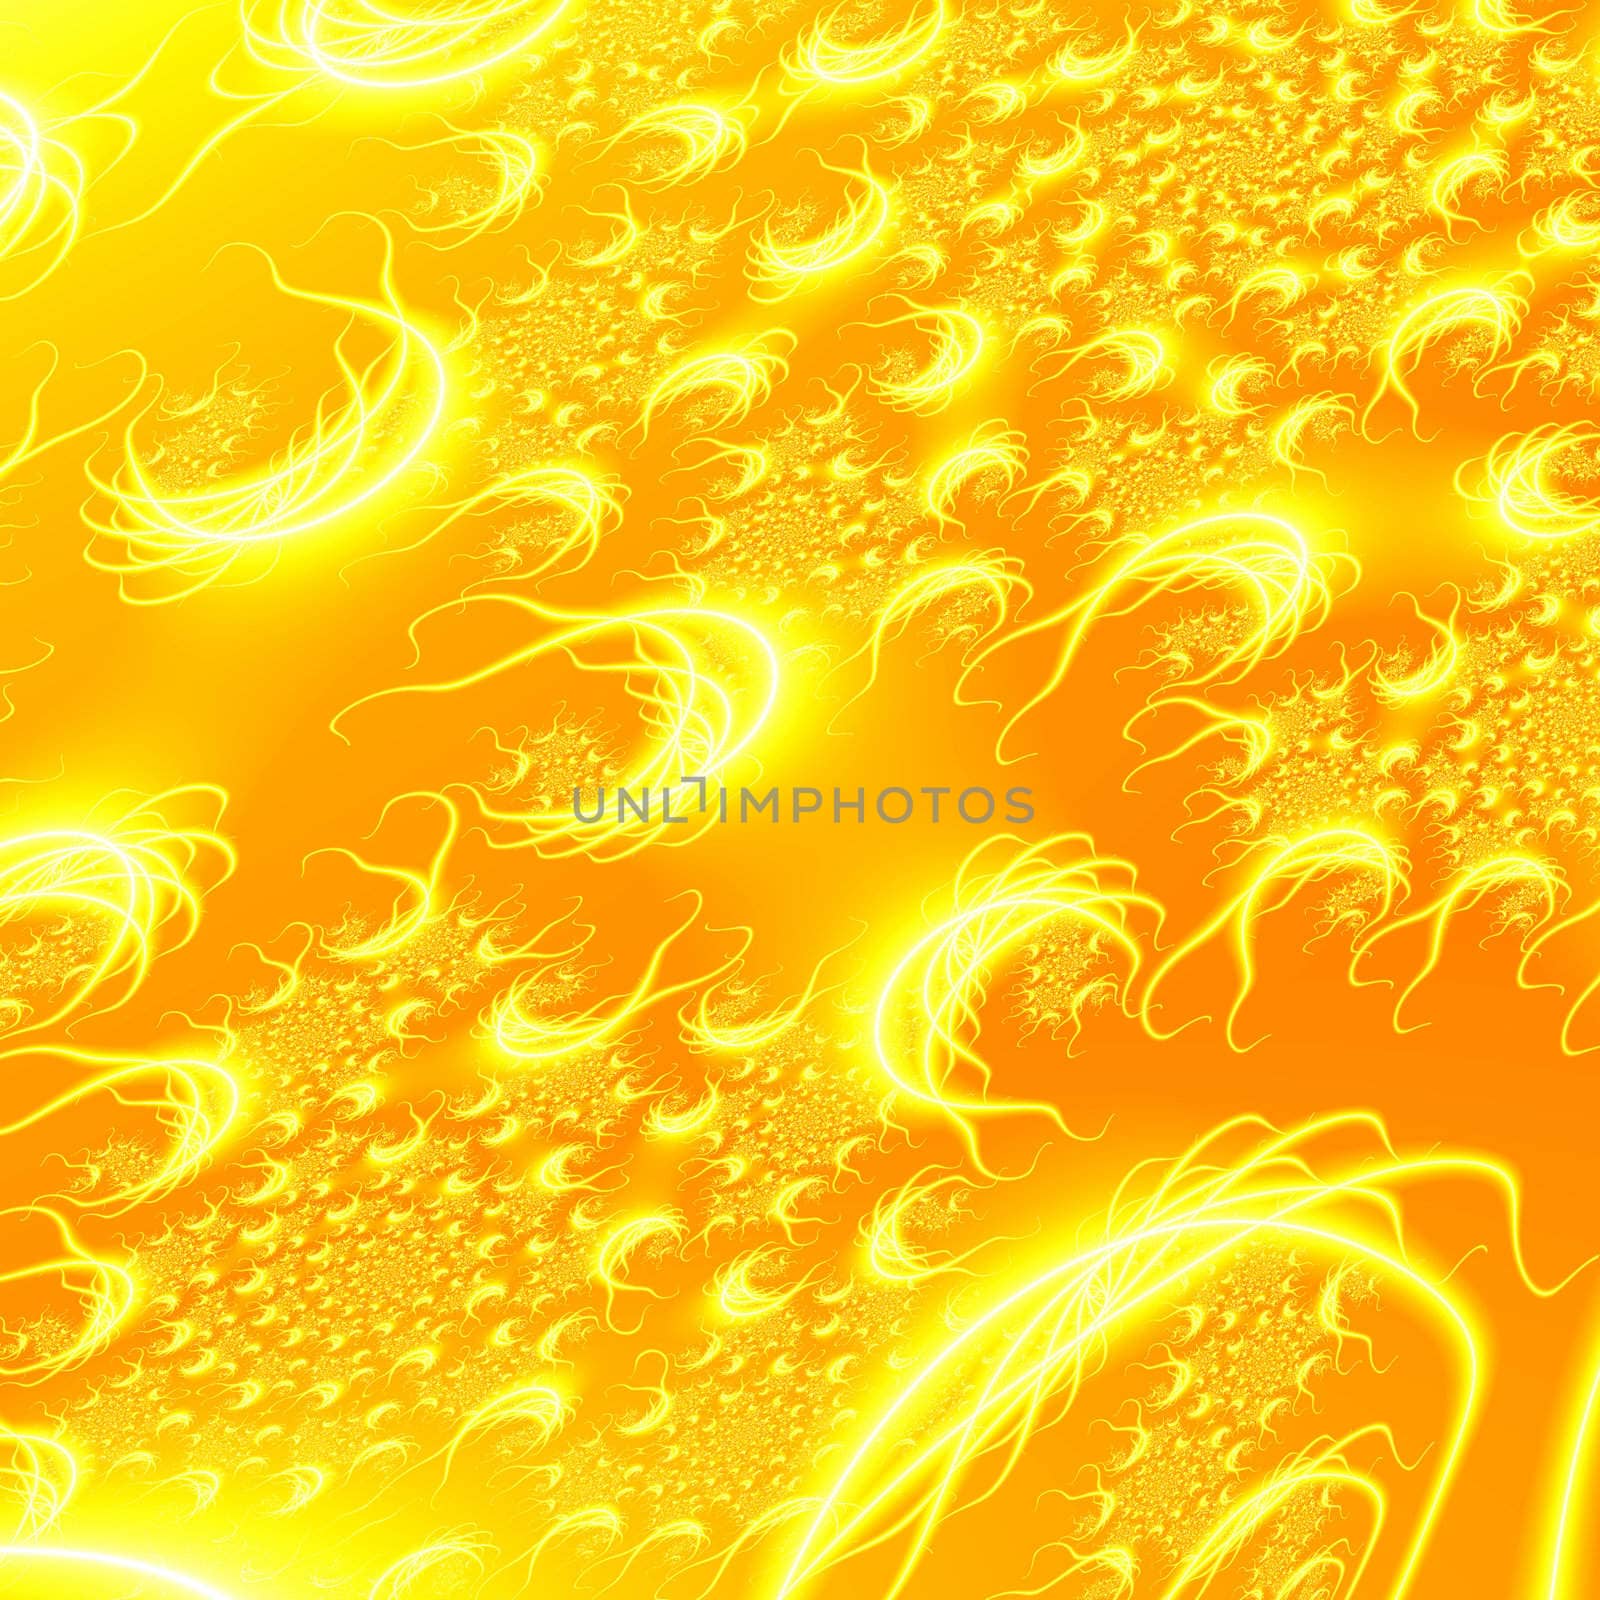 Abstract fractal background illustration with flames